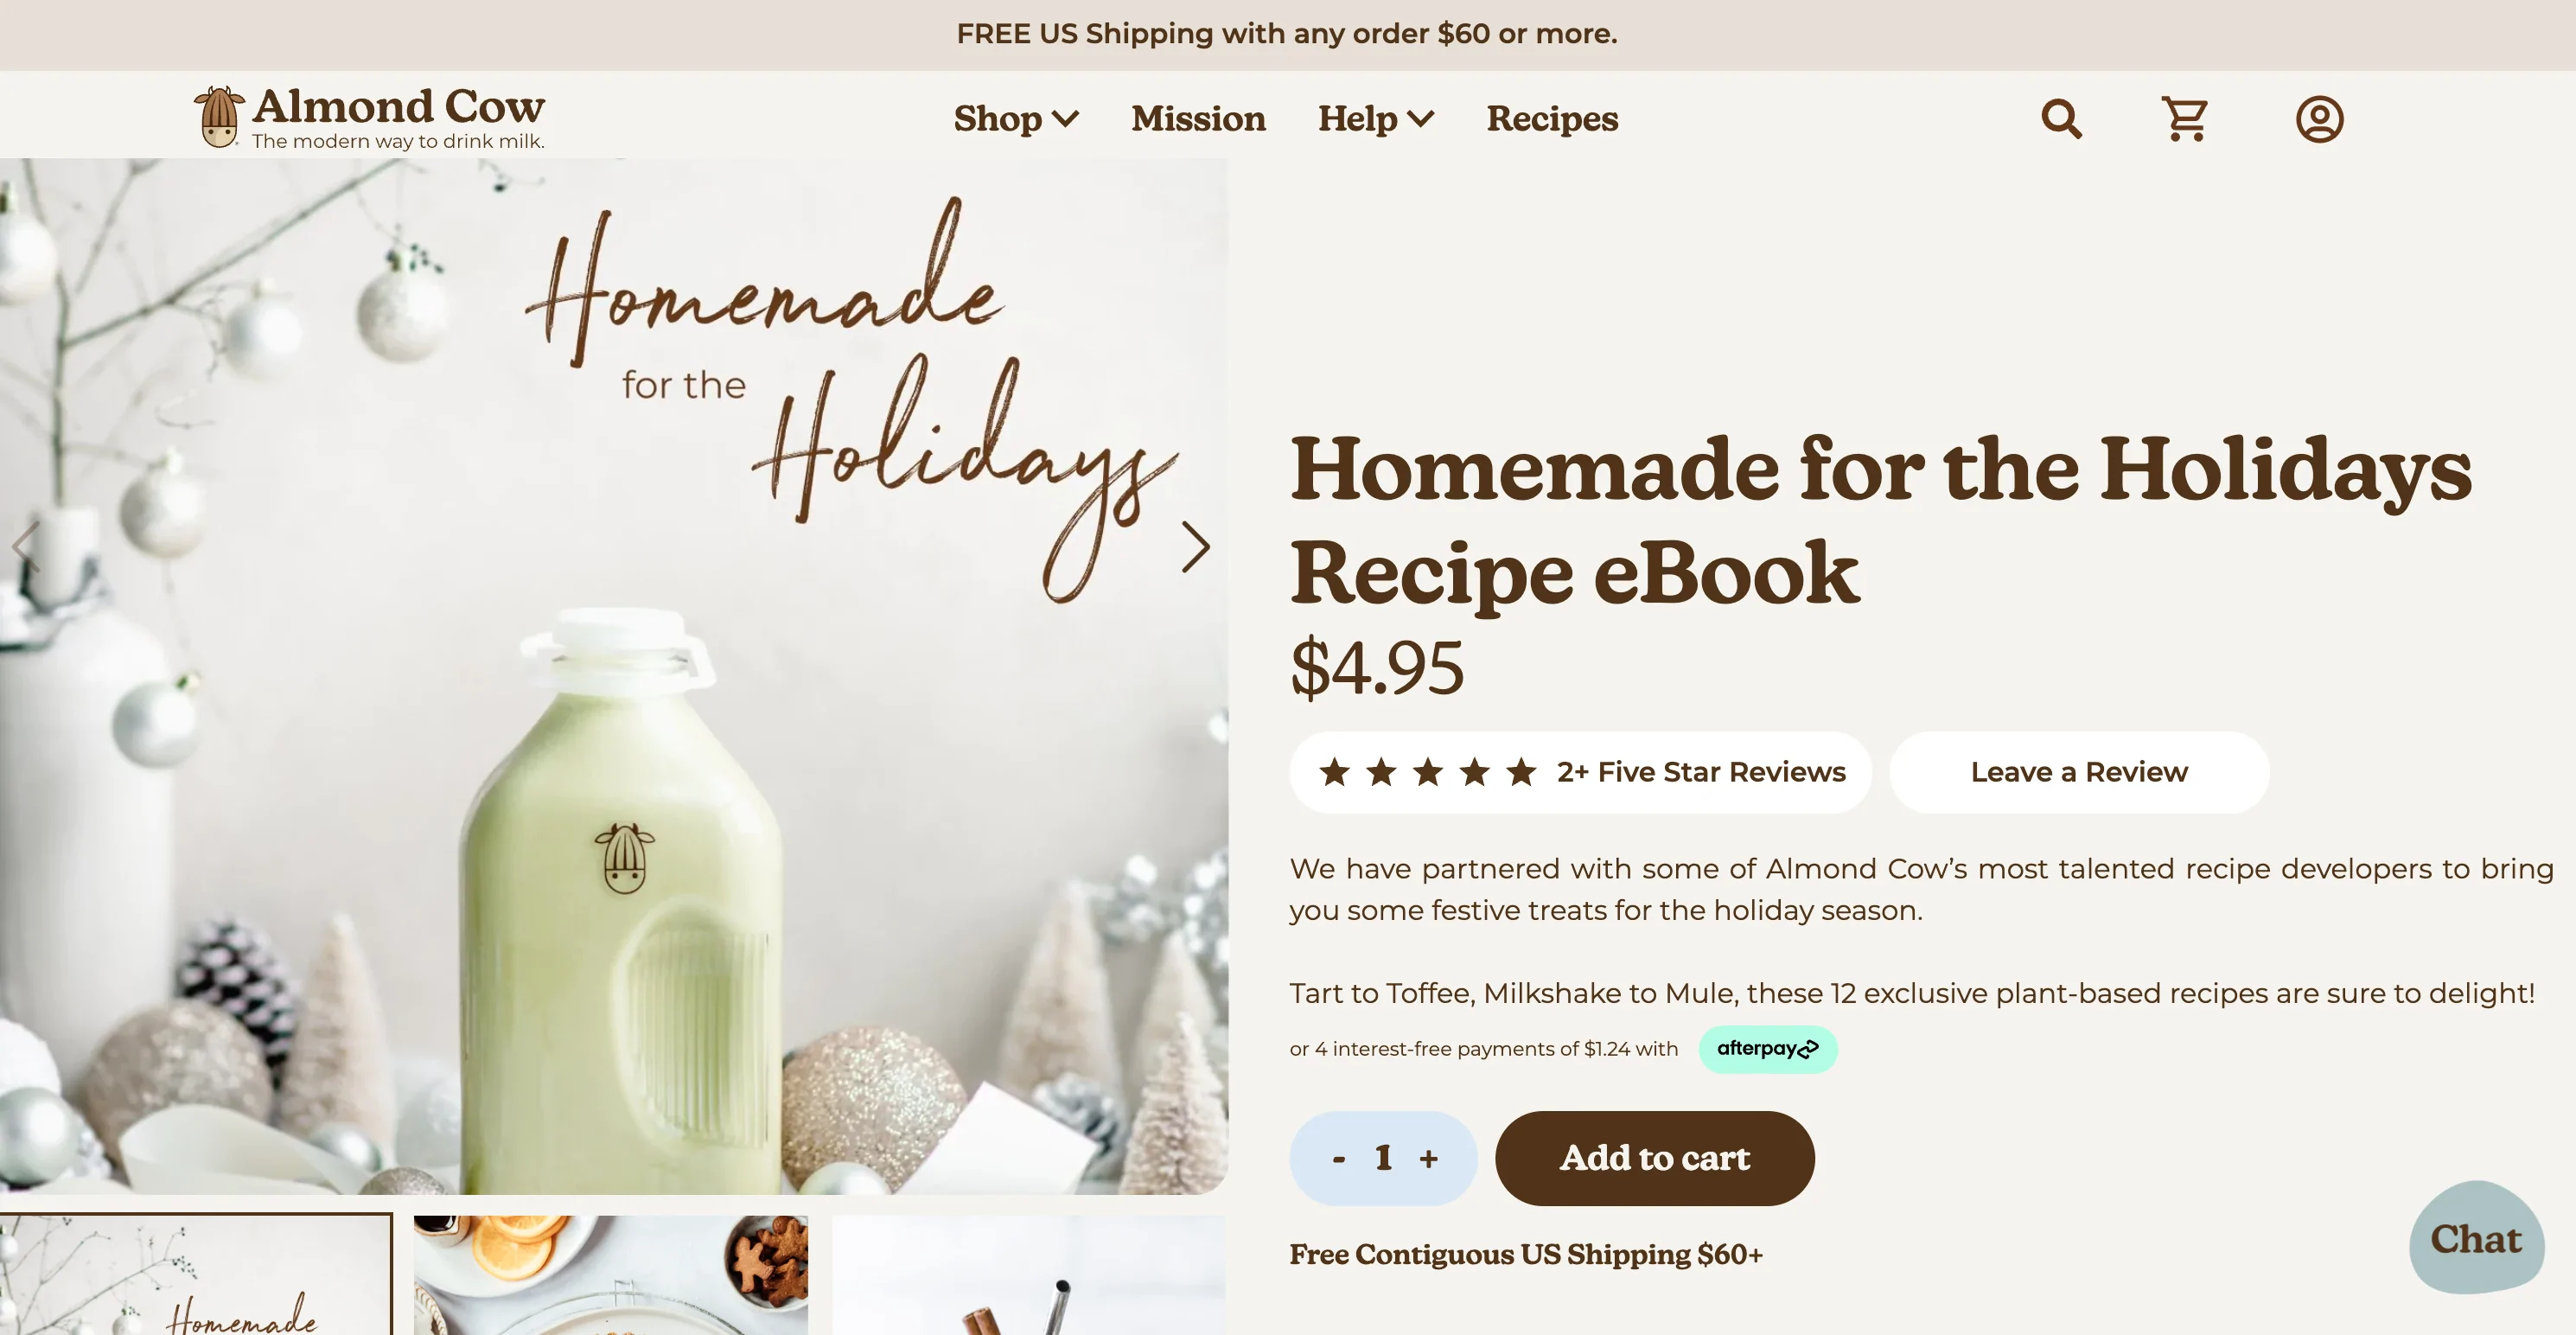 Almond Cow product page selling a recipe e-book